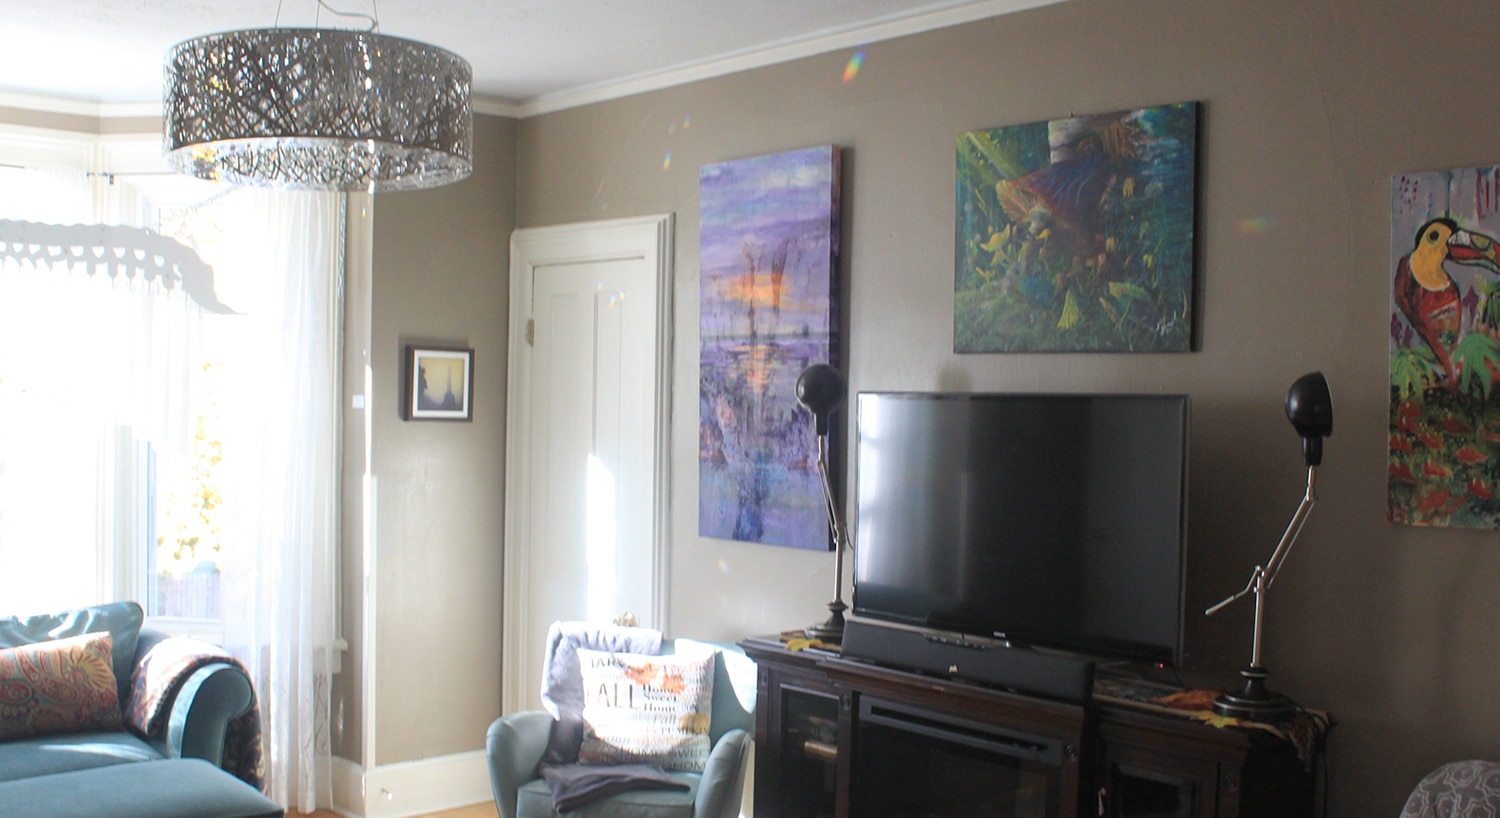 A dark beige wall filled with colorful paintings, and a TV on top of a fake fireplace. A decorative silver metal chandelier and a white door.